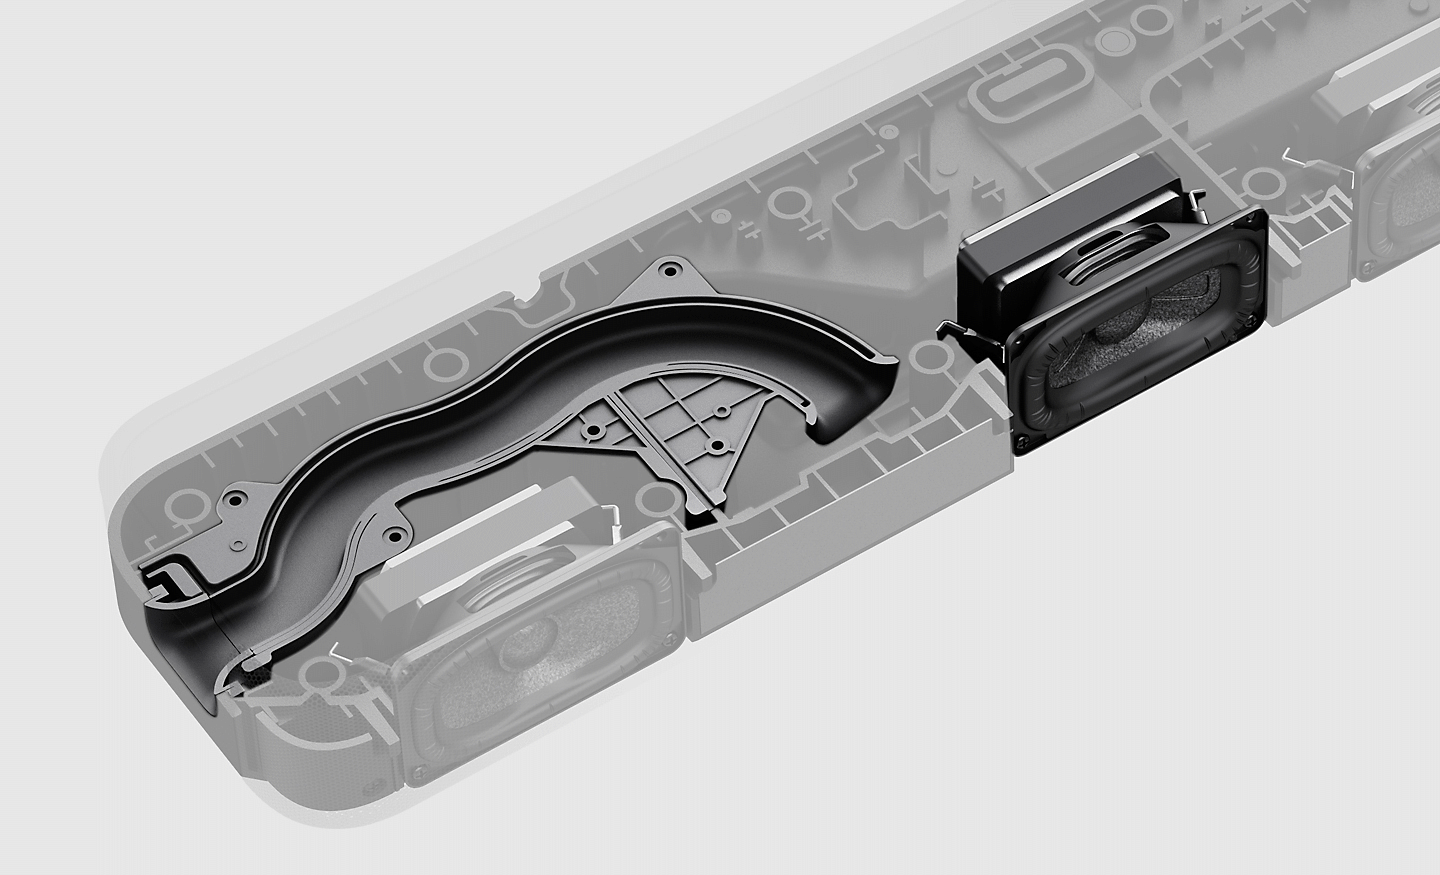 Image of the internal components of the HT-S2000 sound bar with the focus on the duct and speaker